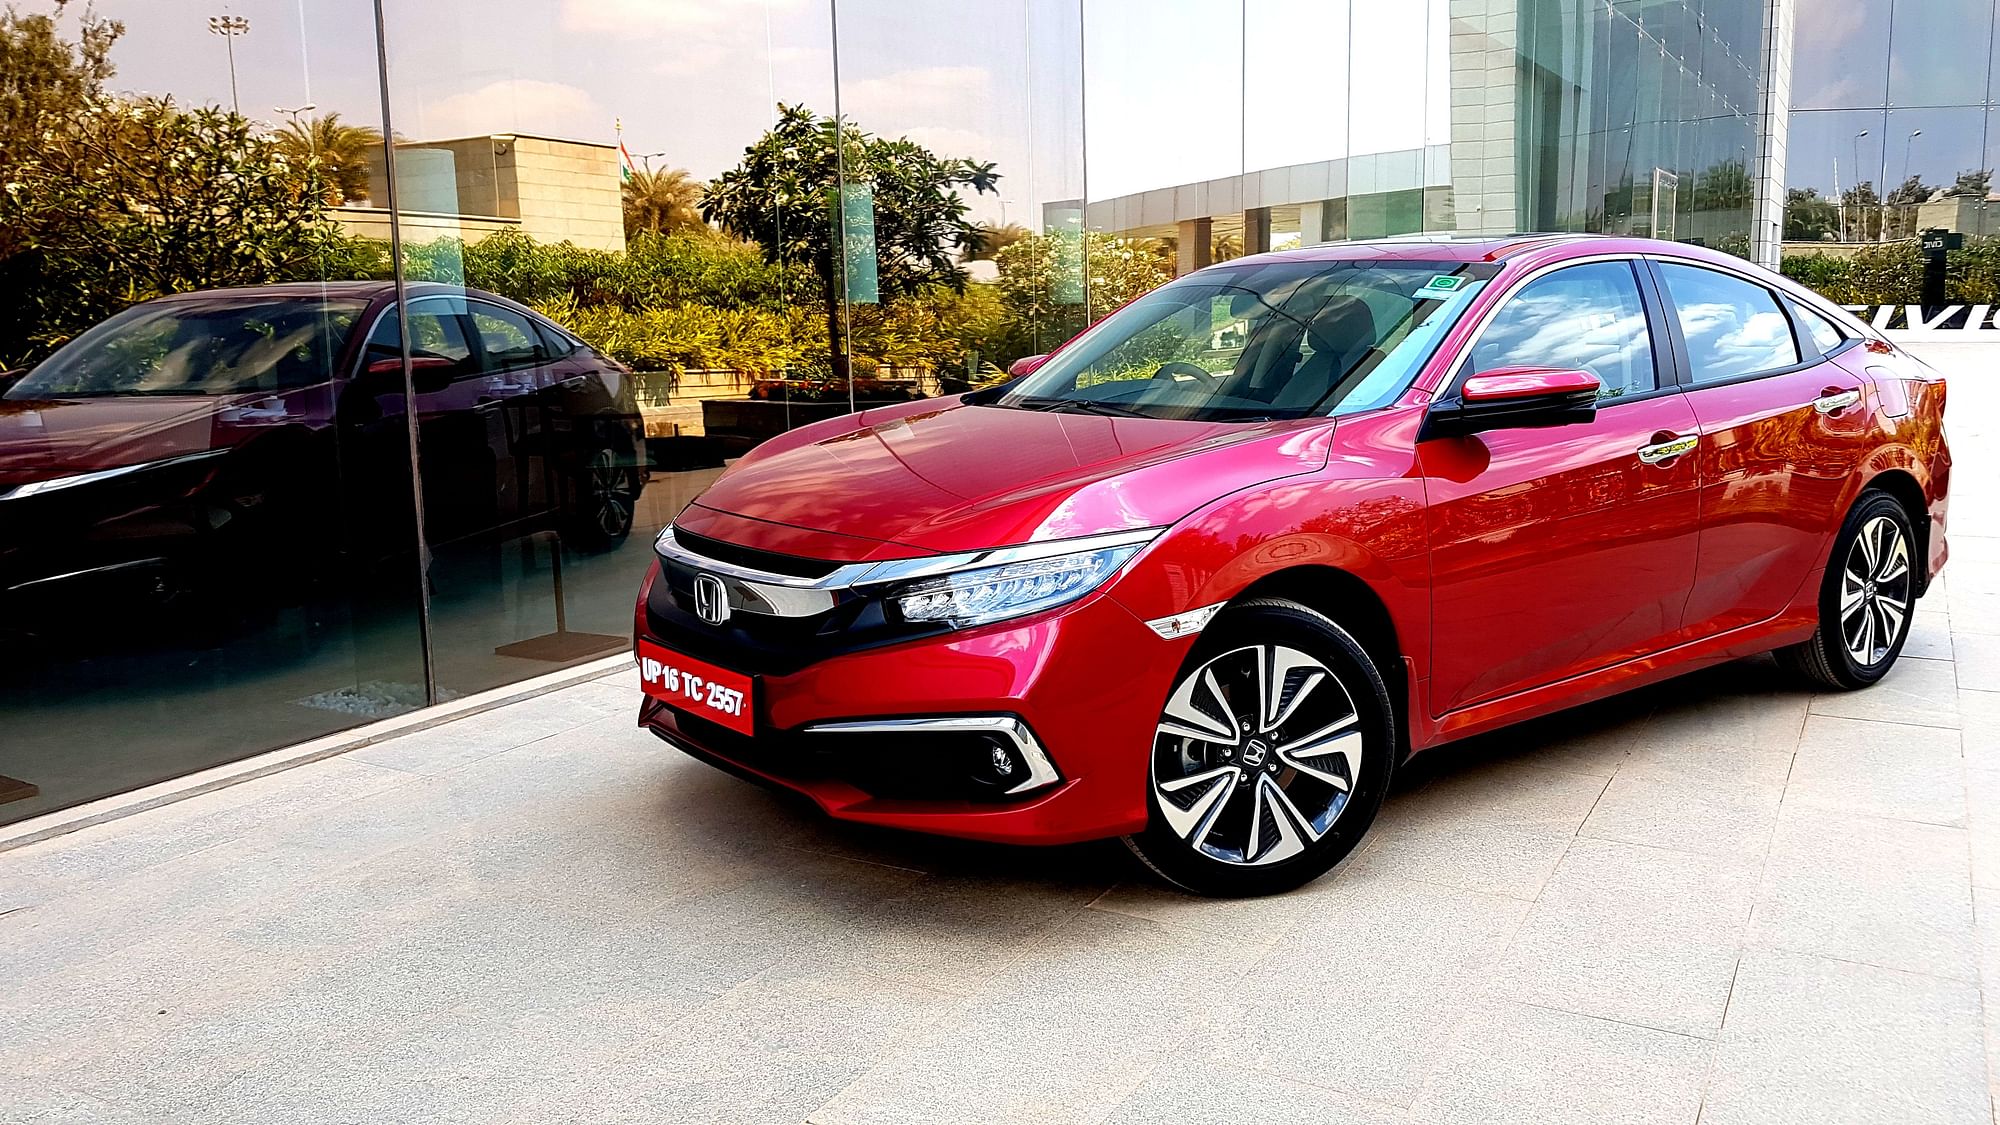 The Honda Civic has distinct coupe-like styling with the family look.